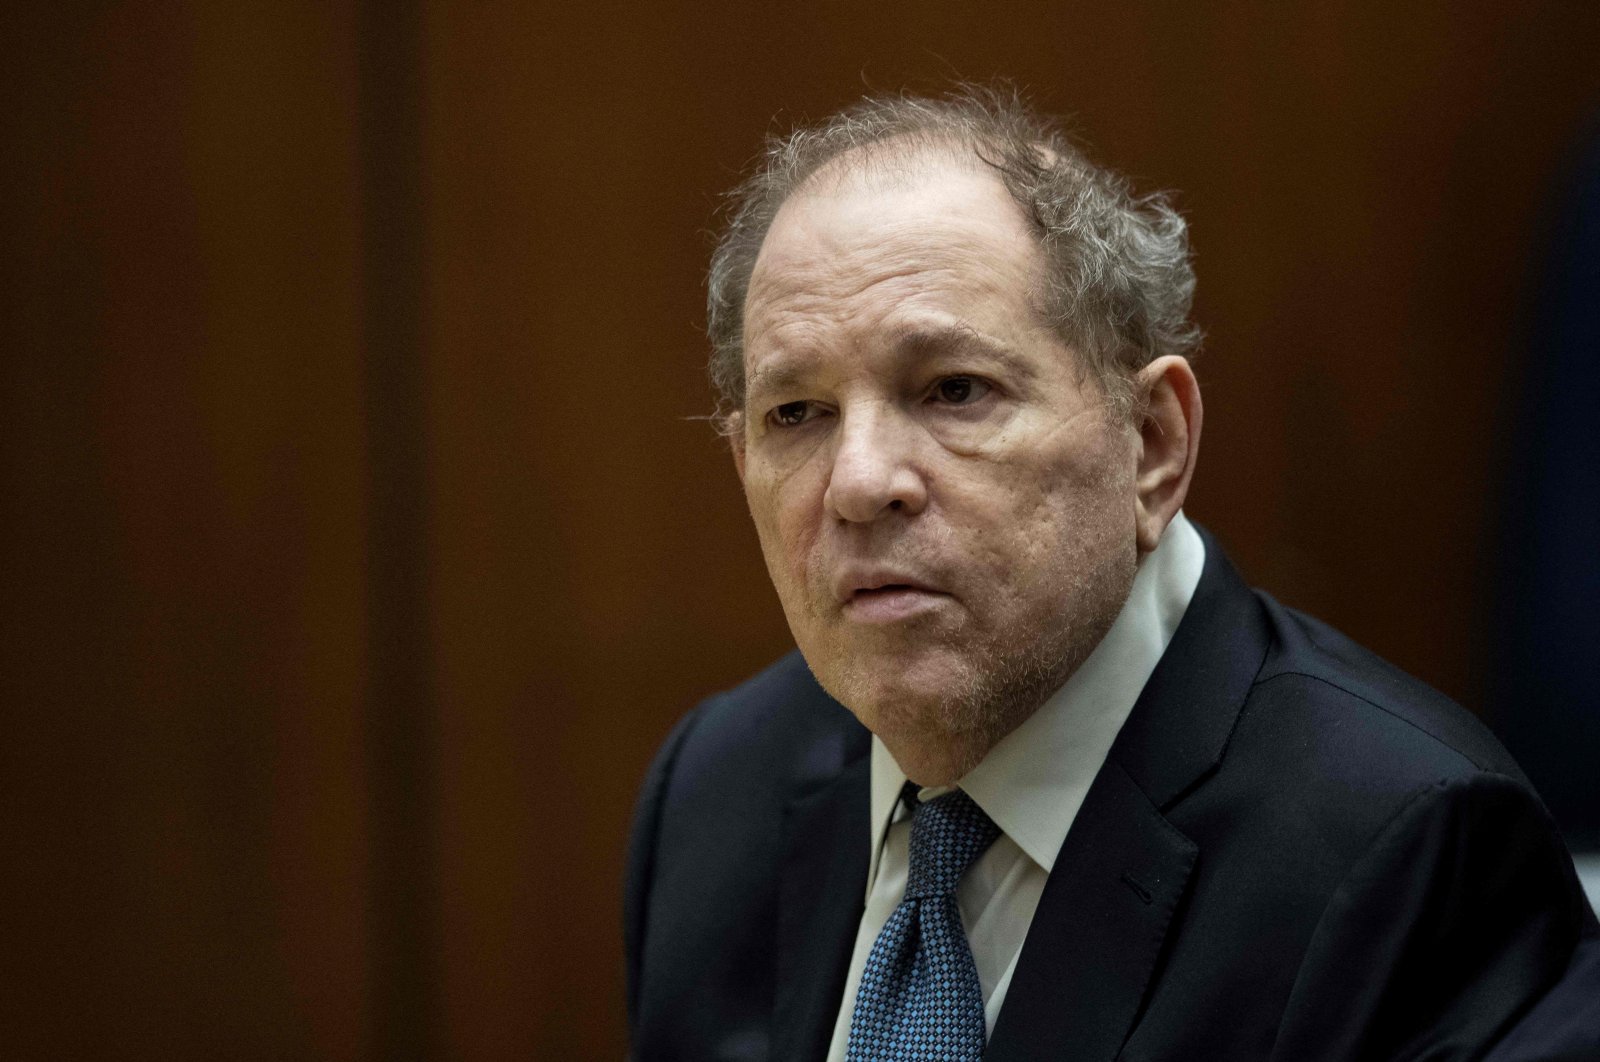 Former film producer Harvey Weinstein appears in court at the Clara Shortridge Foltz Criminal Justice Center in Los Angeles, U.S., Oct. 4, 2022. (AFP Photo)